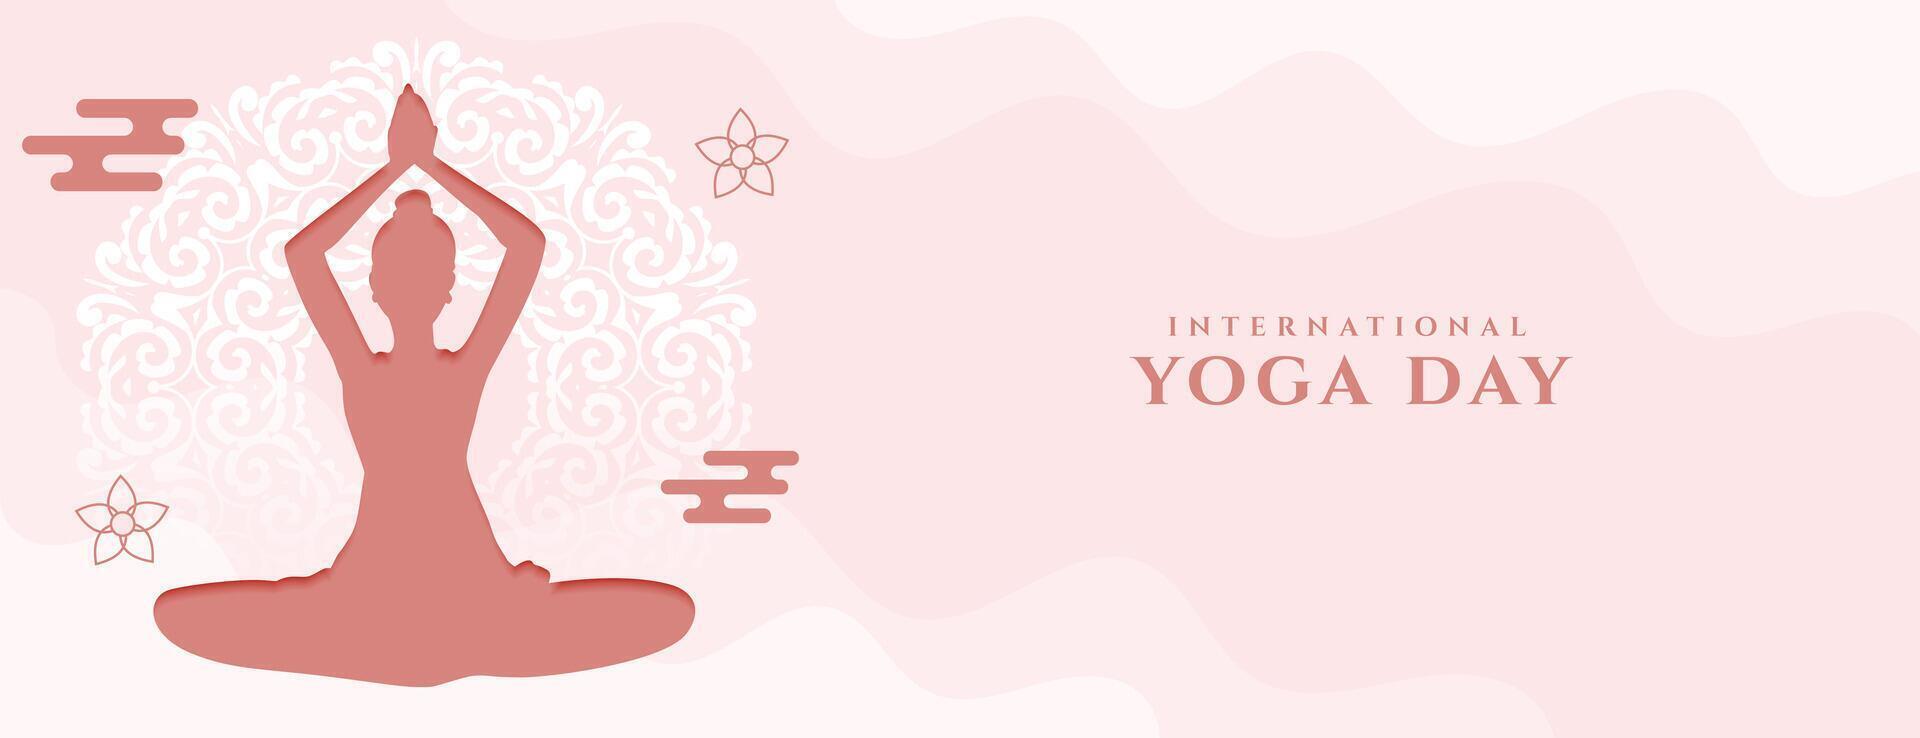 paper cut style international yoga day banner for fitness and health therapy vector